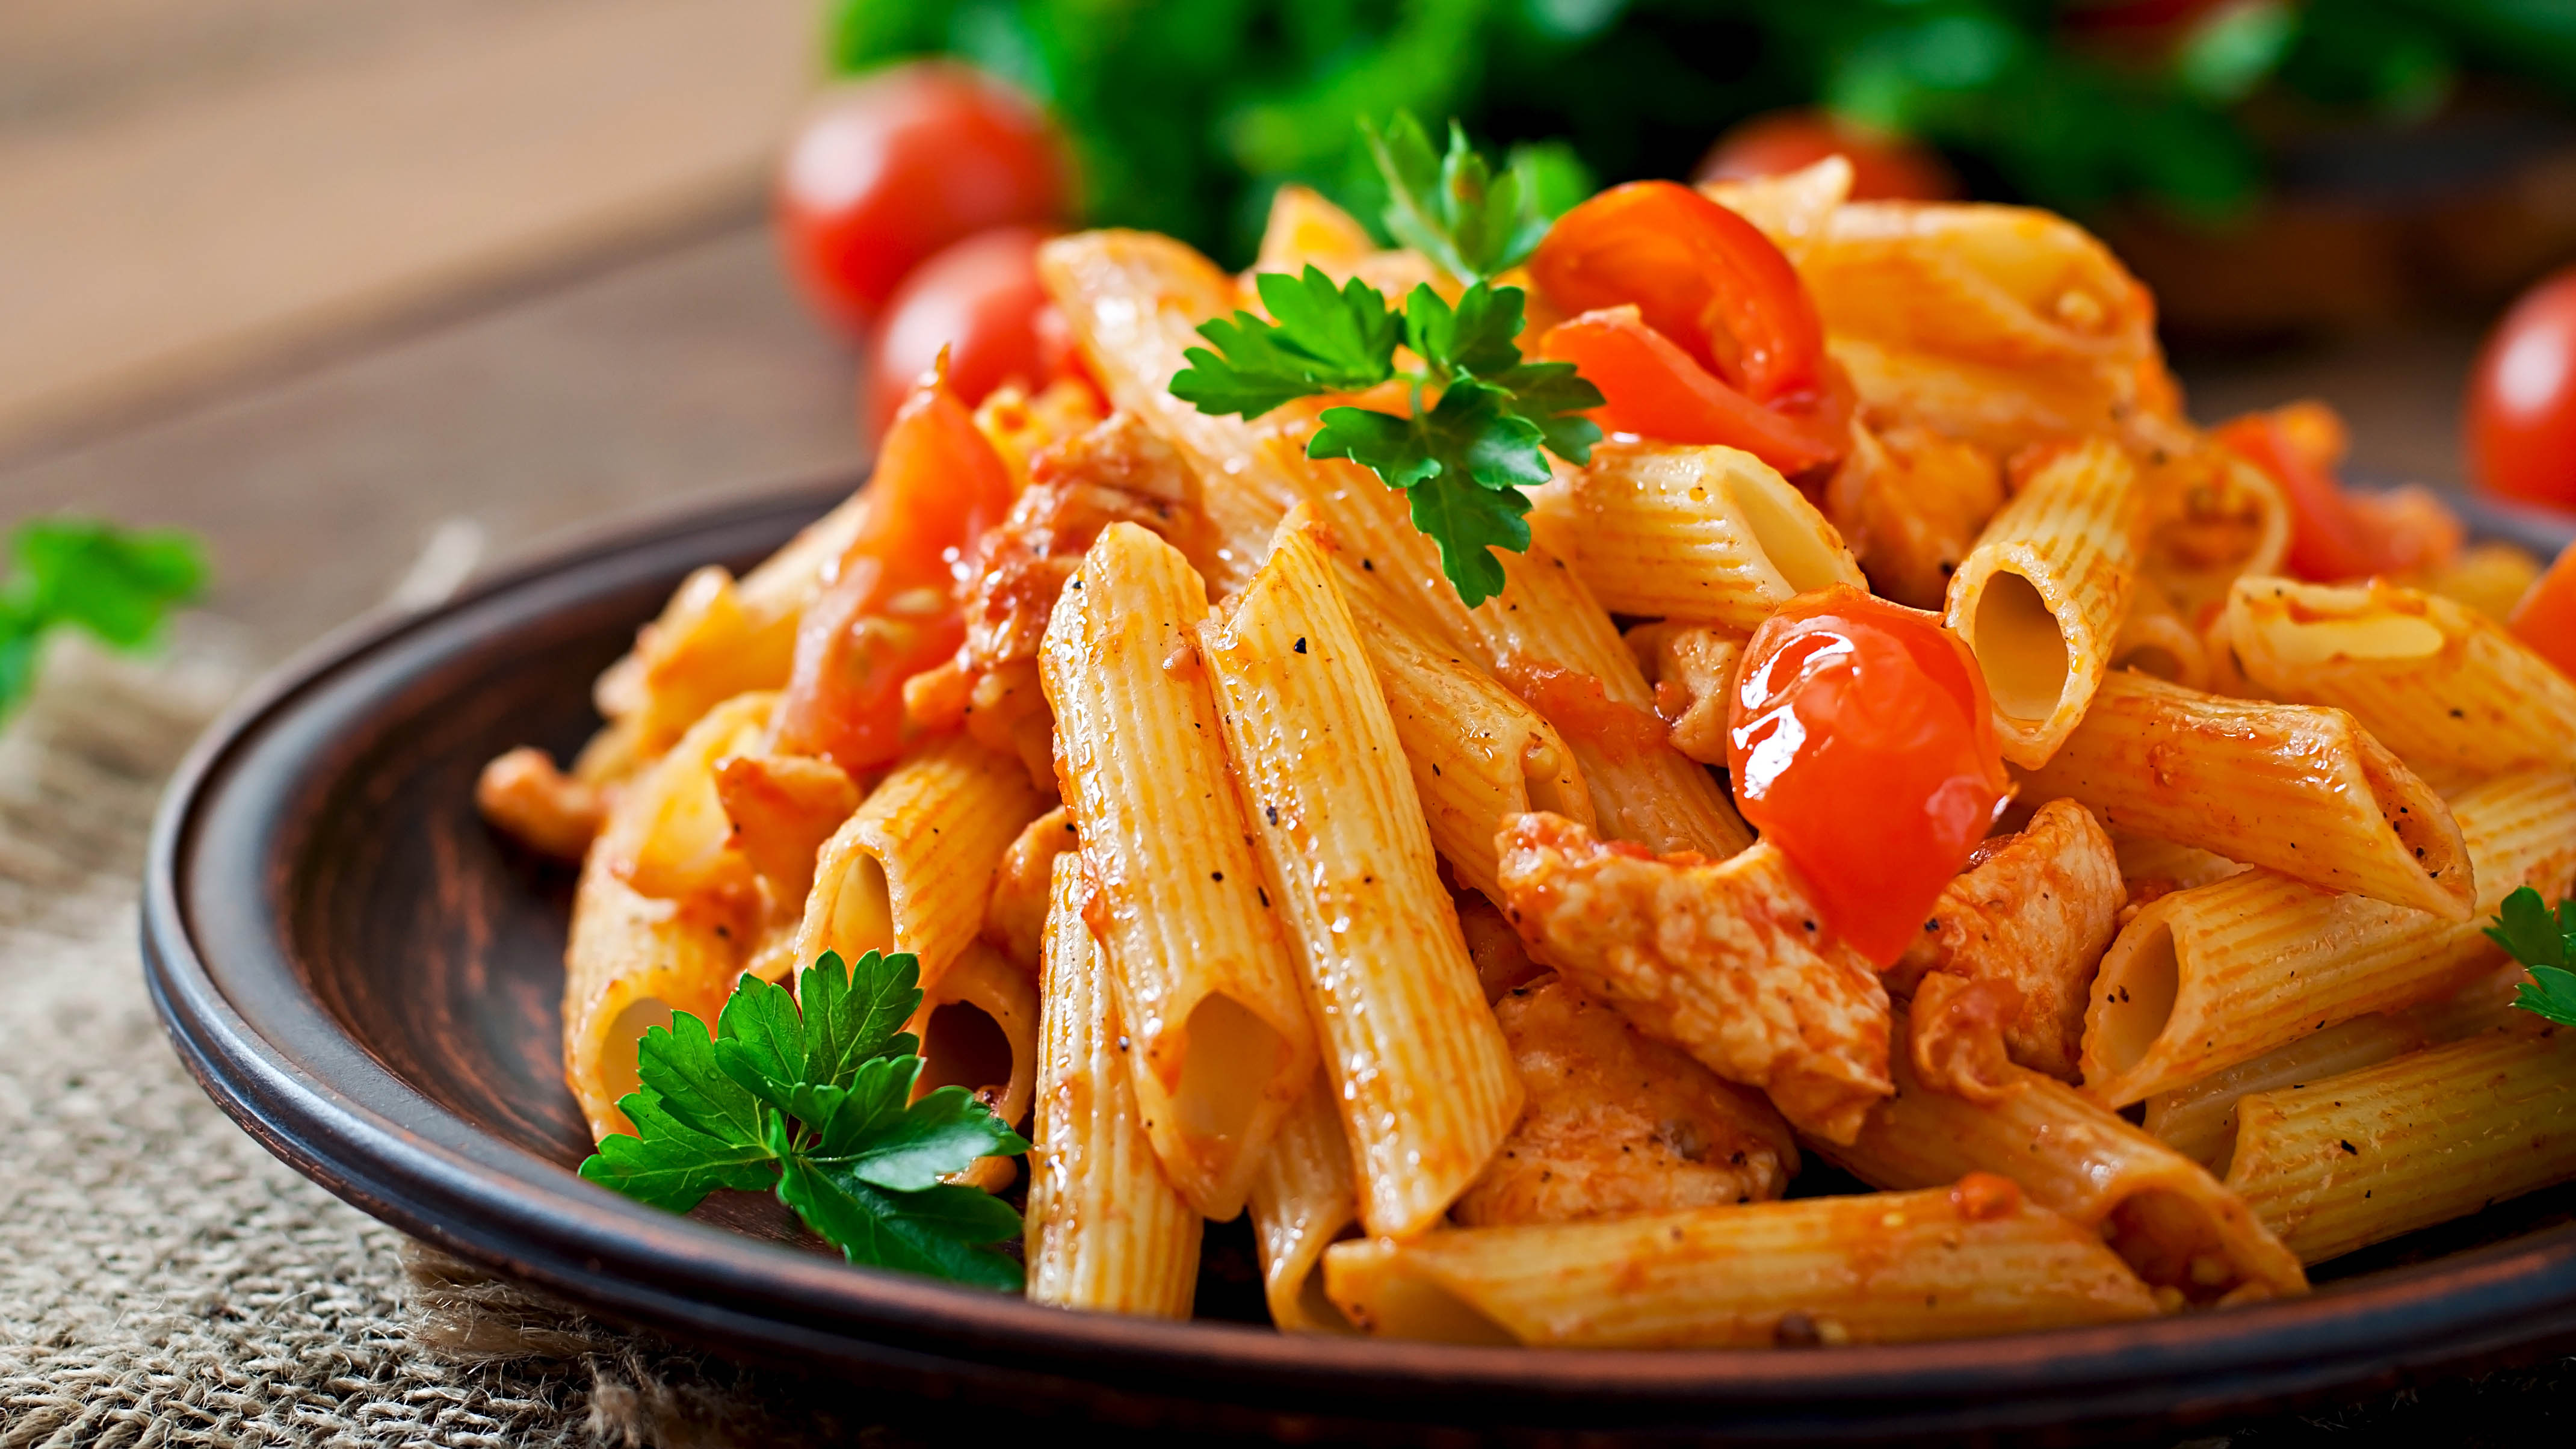 A bowl of cooked pasta with sauce